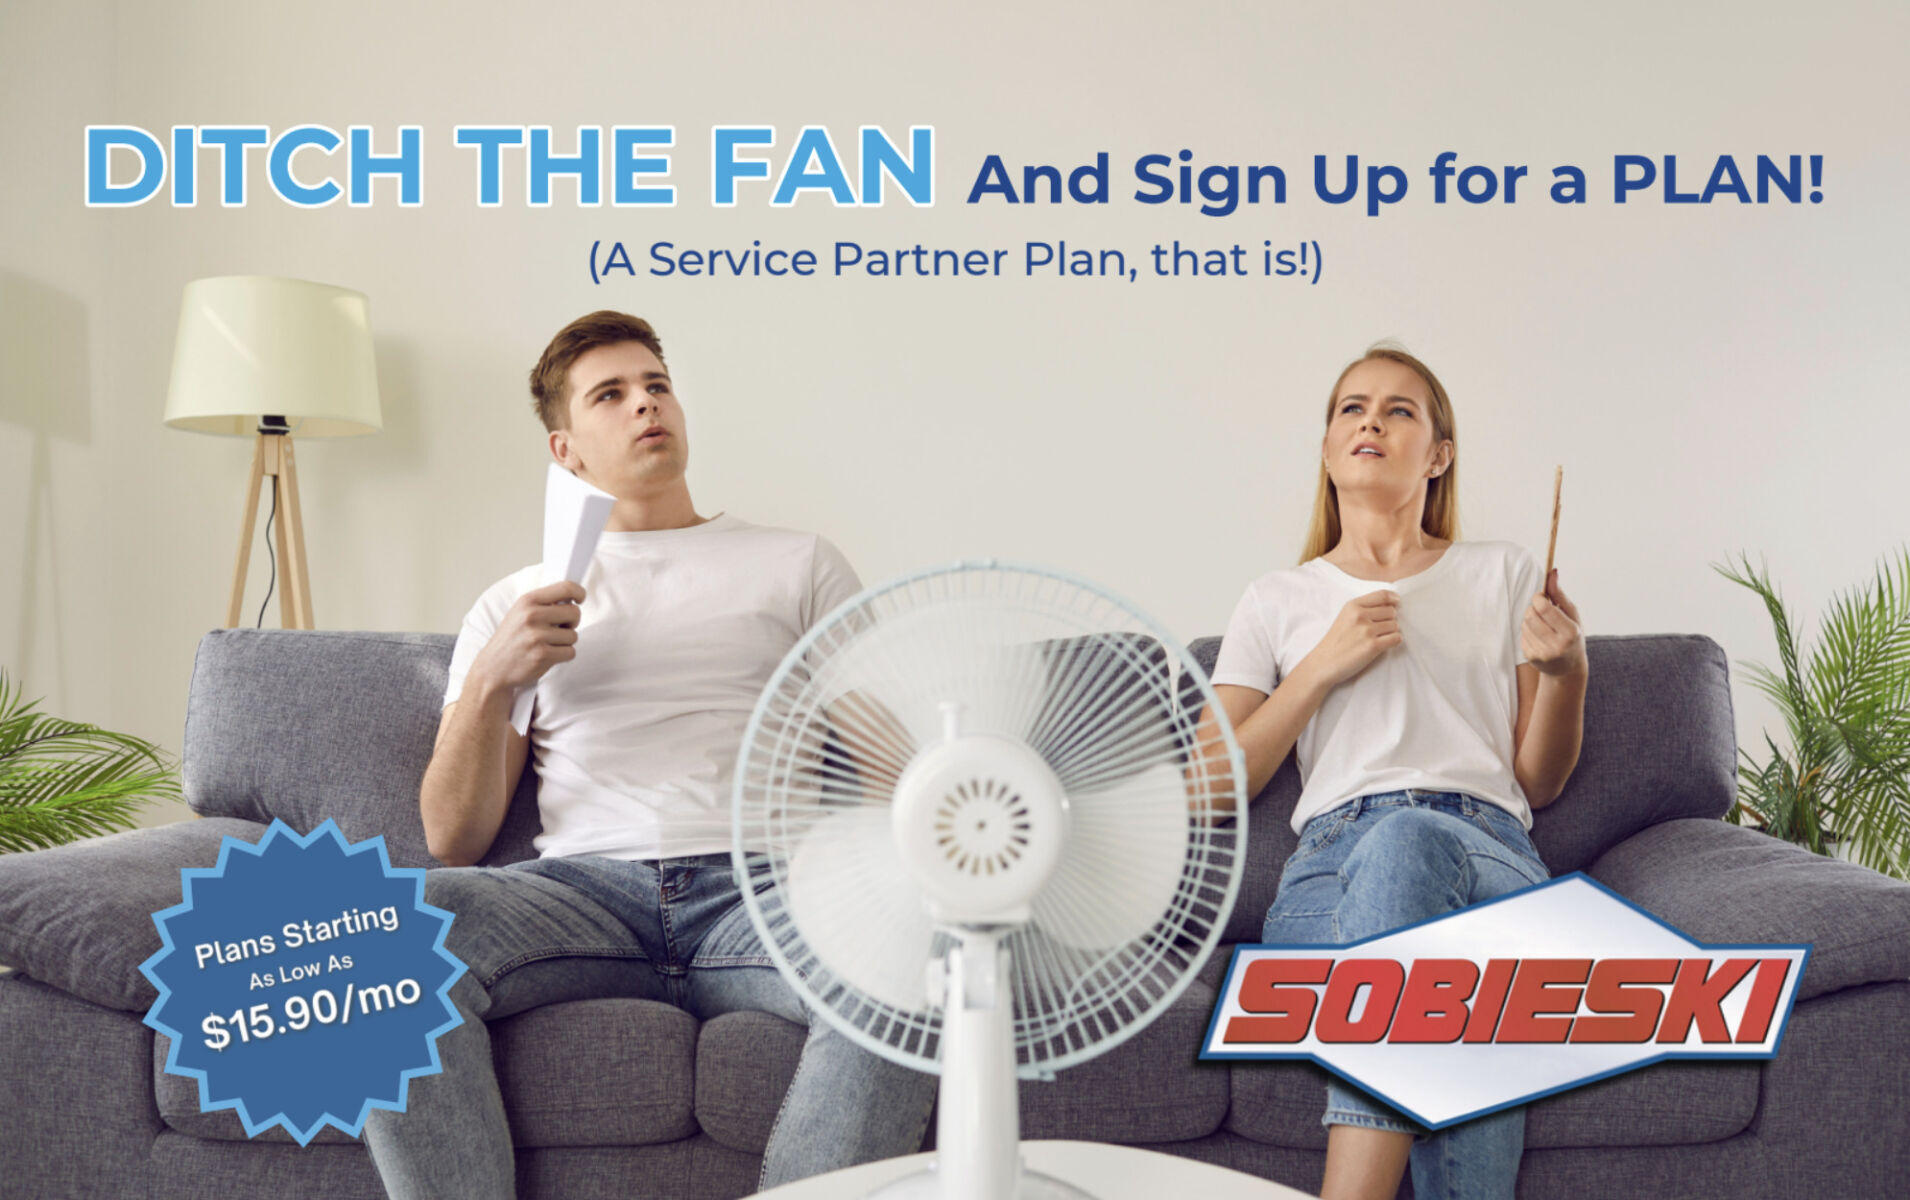 DITCH THE FAN And Sign Up for a Plan!